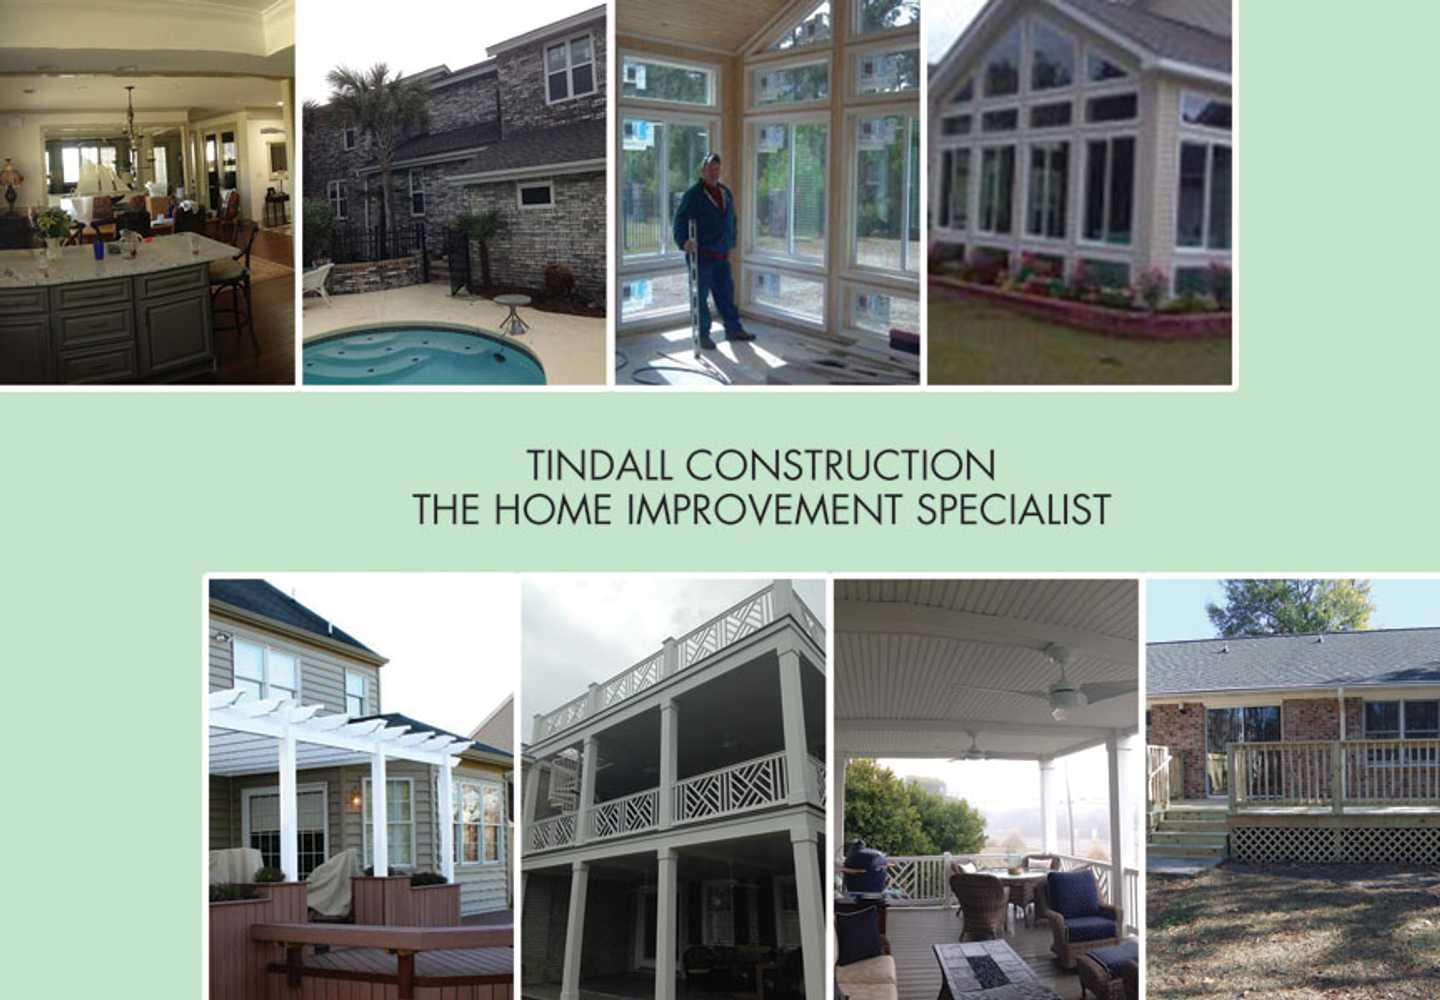 Project photos from Tindall Construction